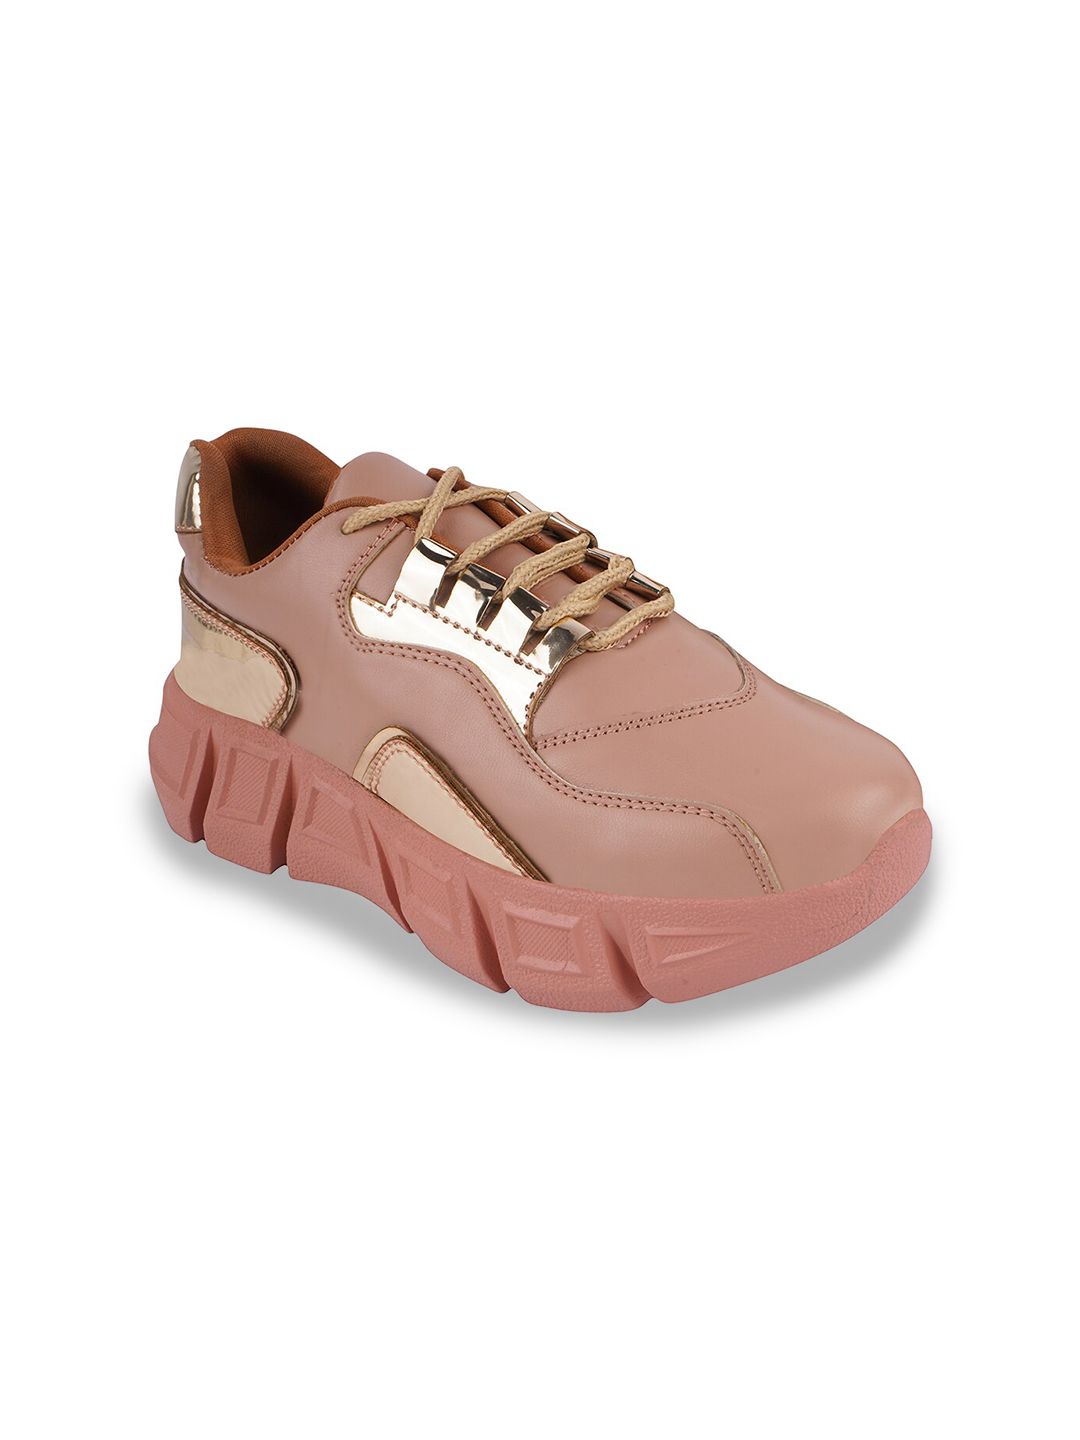 Shoetopia Women Peach-Coloured Running Non-Marking Shoes Price in India